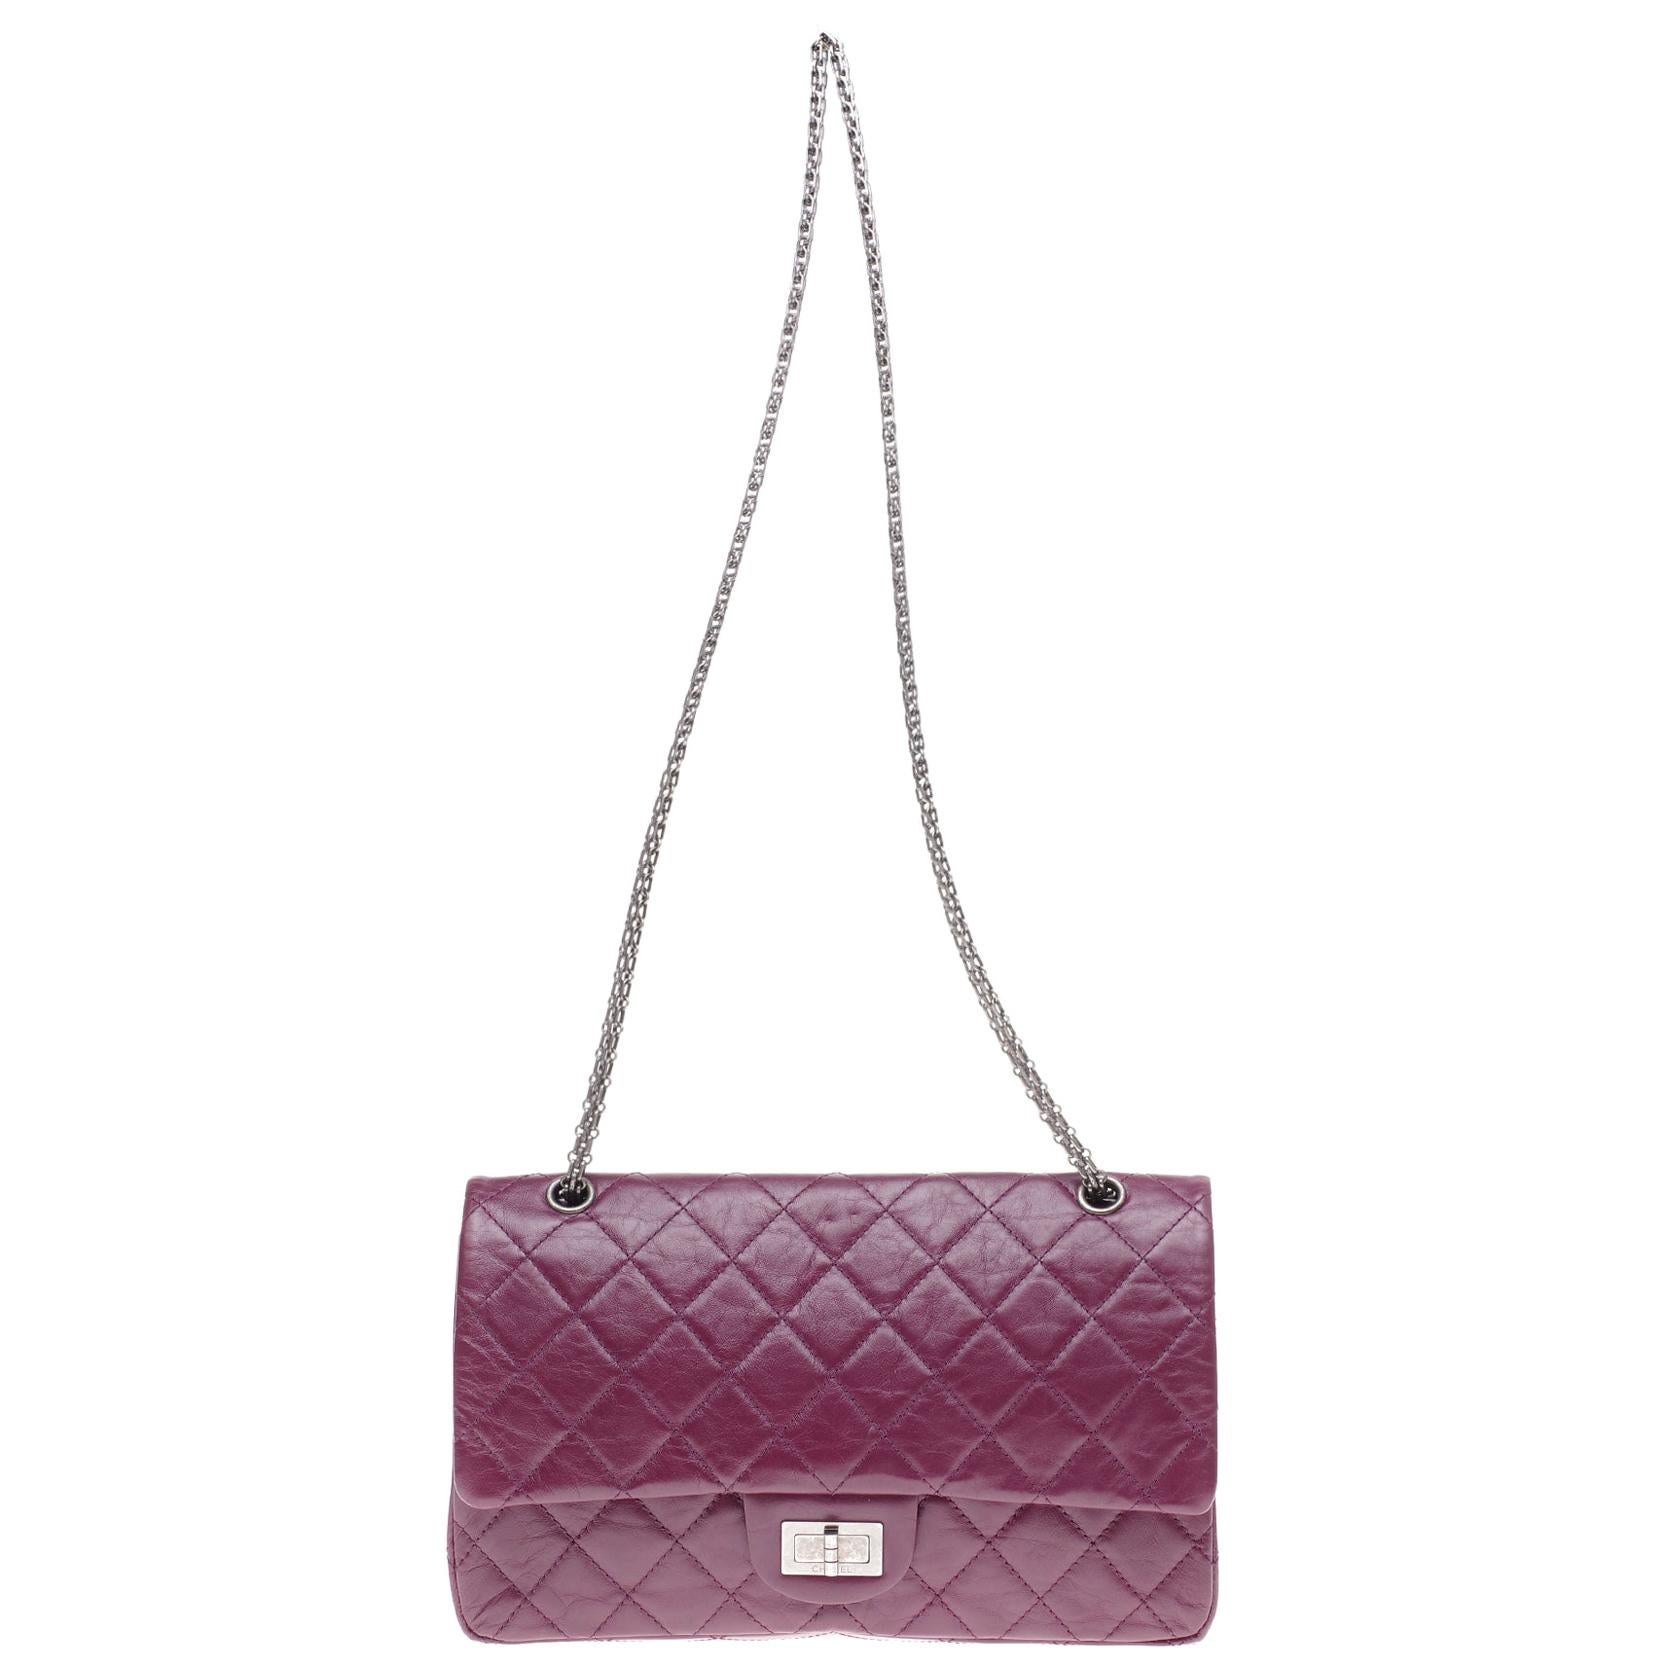 Amazing Chanel 2.55 Reissue handbag in plum quilted leather